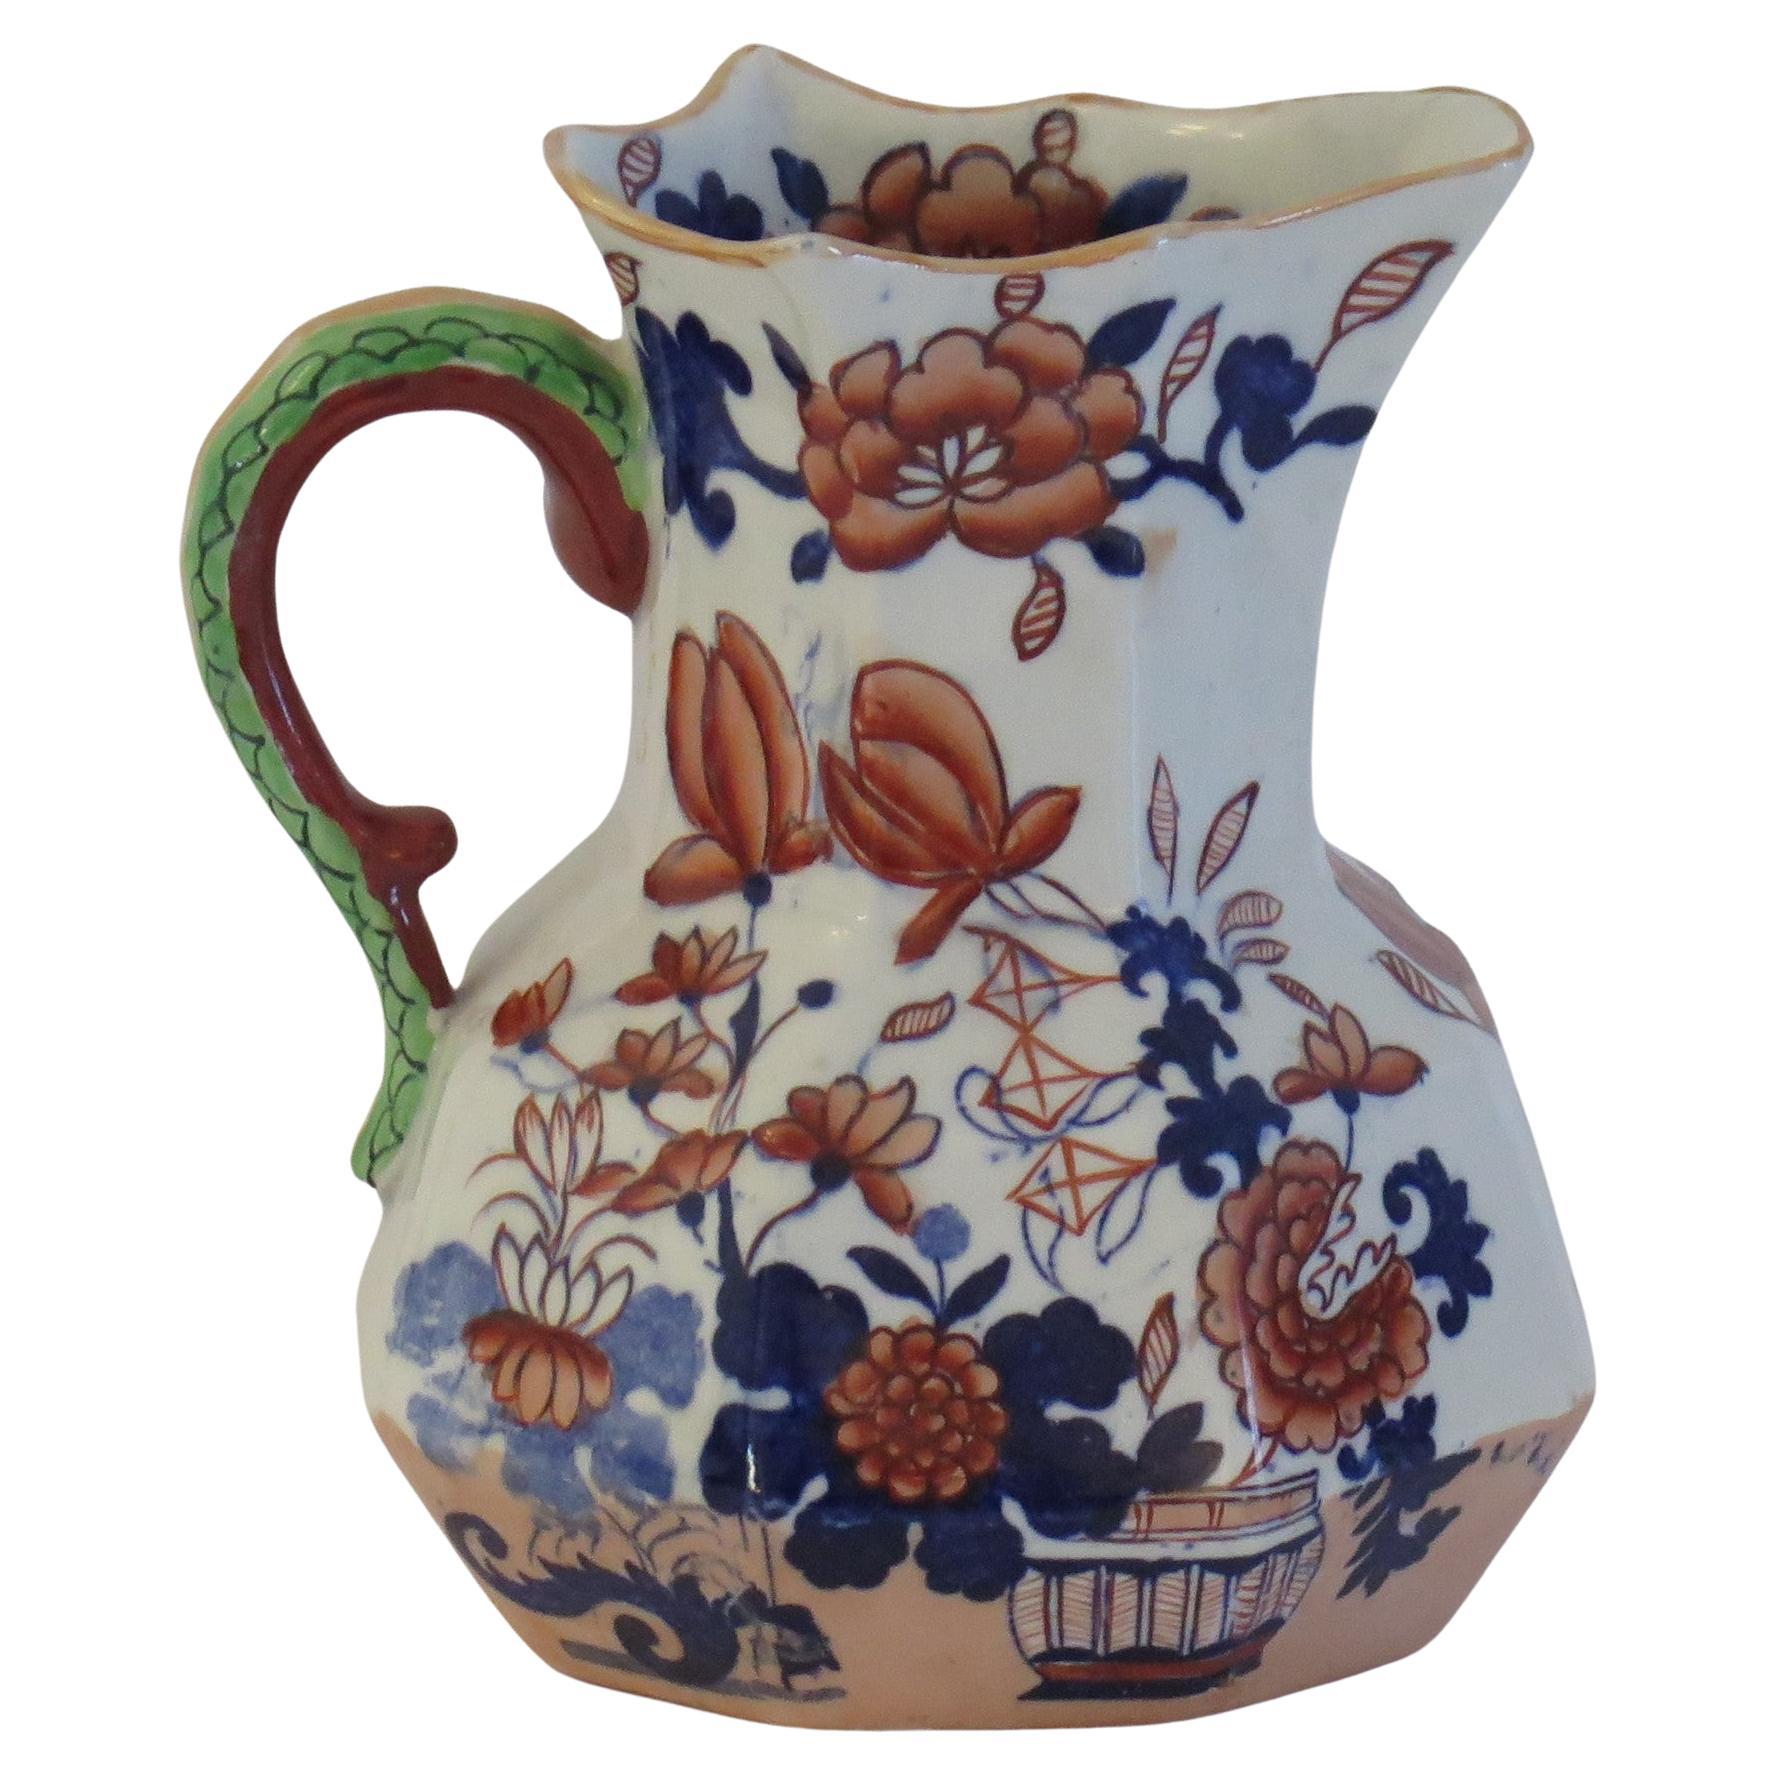 This is a very good, Mason's Ironstone Hydra jug or pitcher in the Basket Japan pattern, made in the England, Circa 1900.

This jug is very decorative and of mid size, over 6 inches high as these jugs were made in a large range of sizes, starting